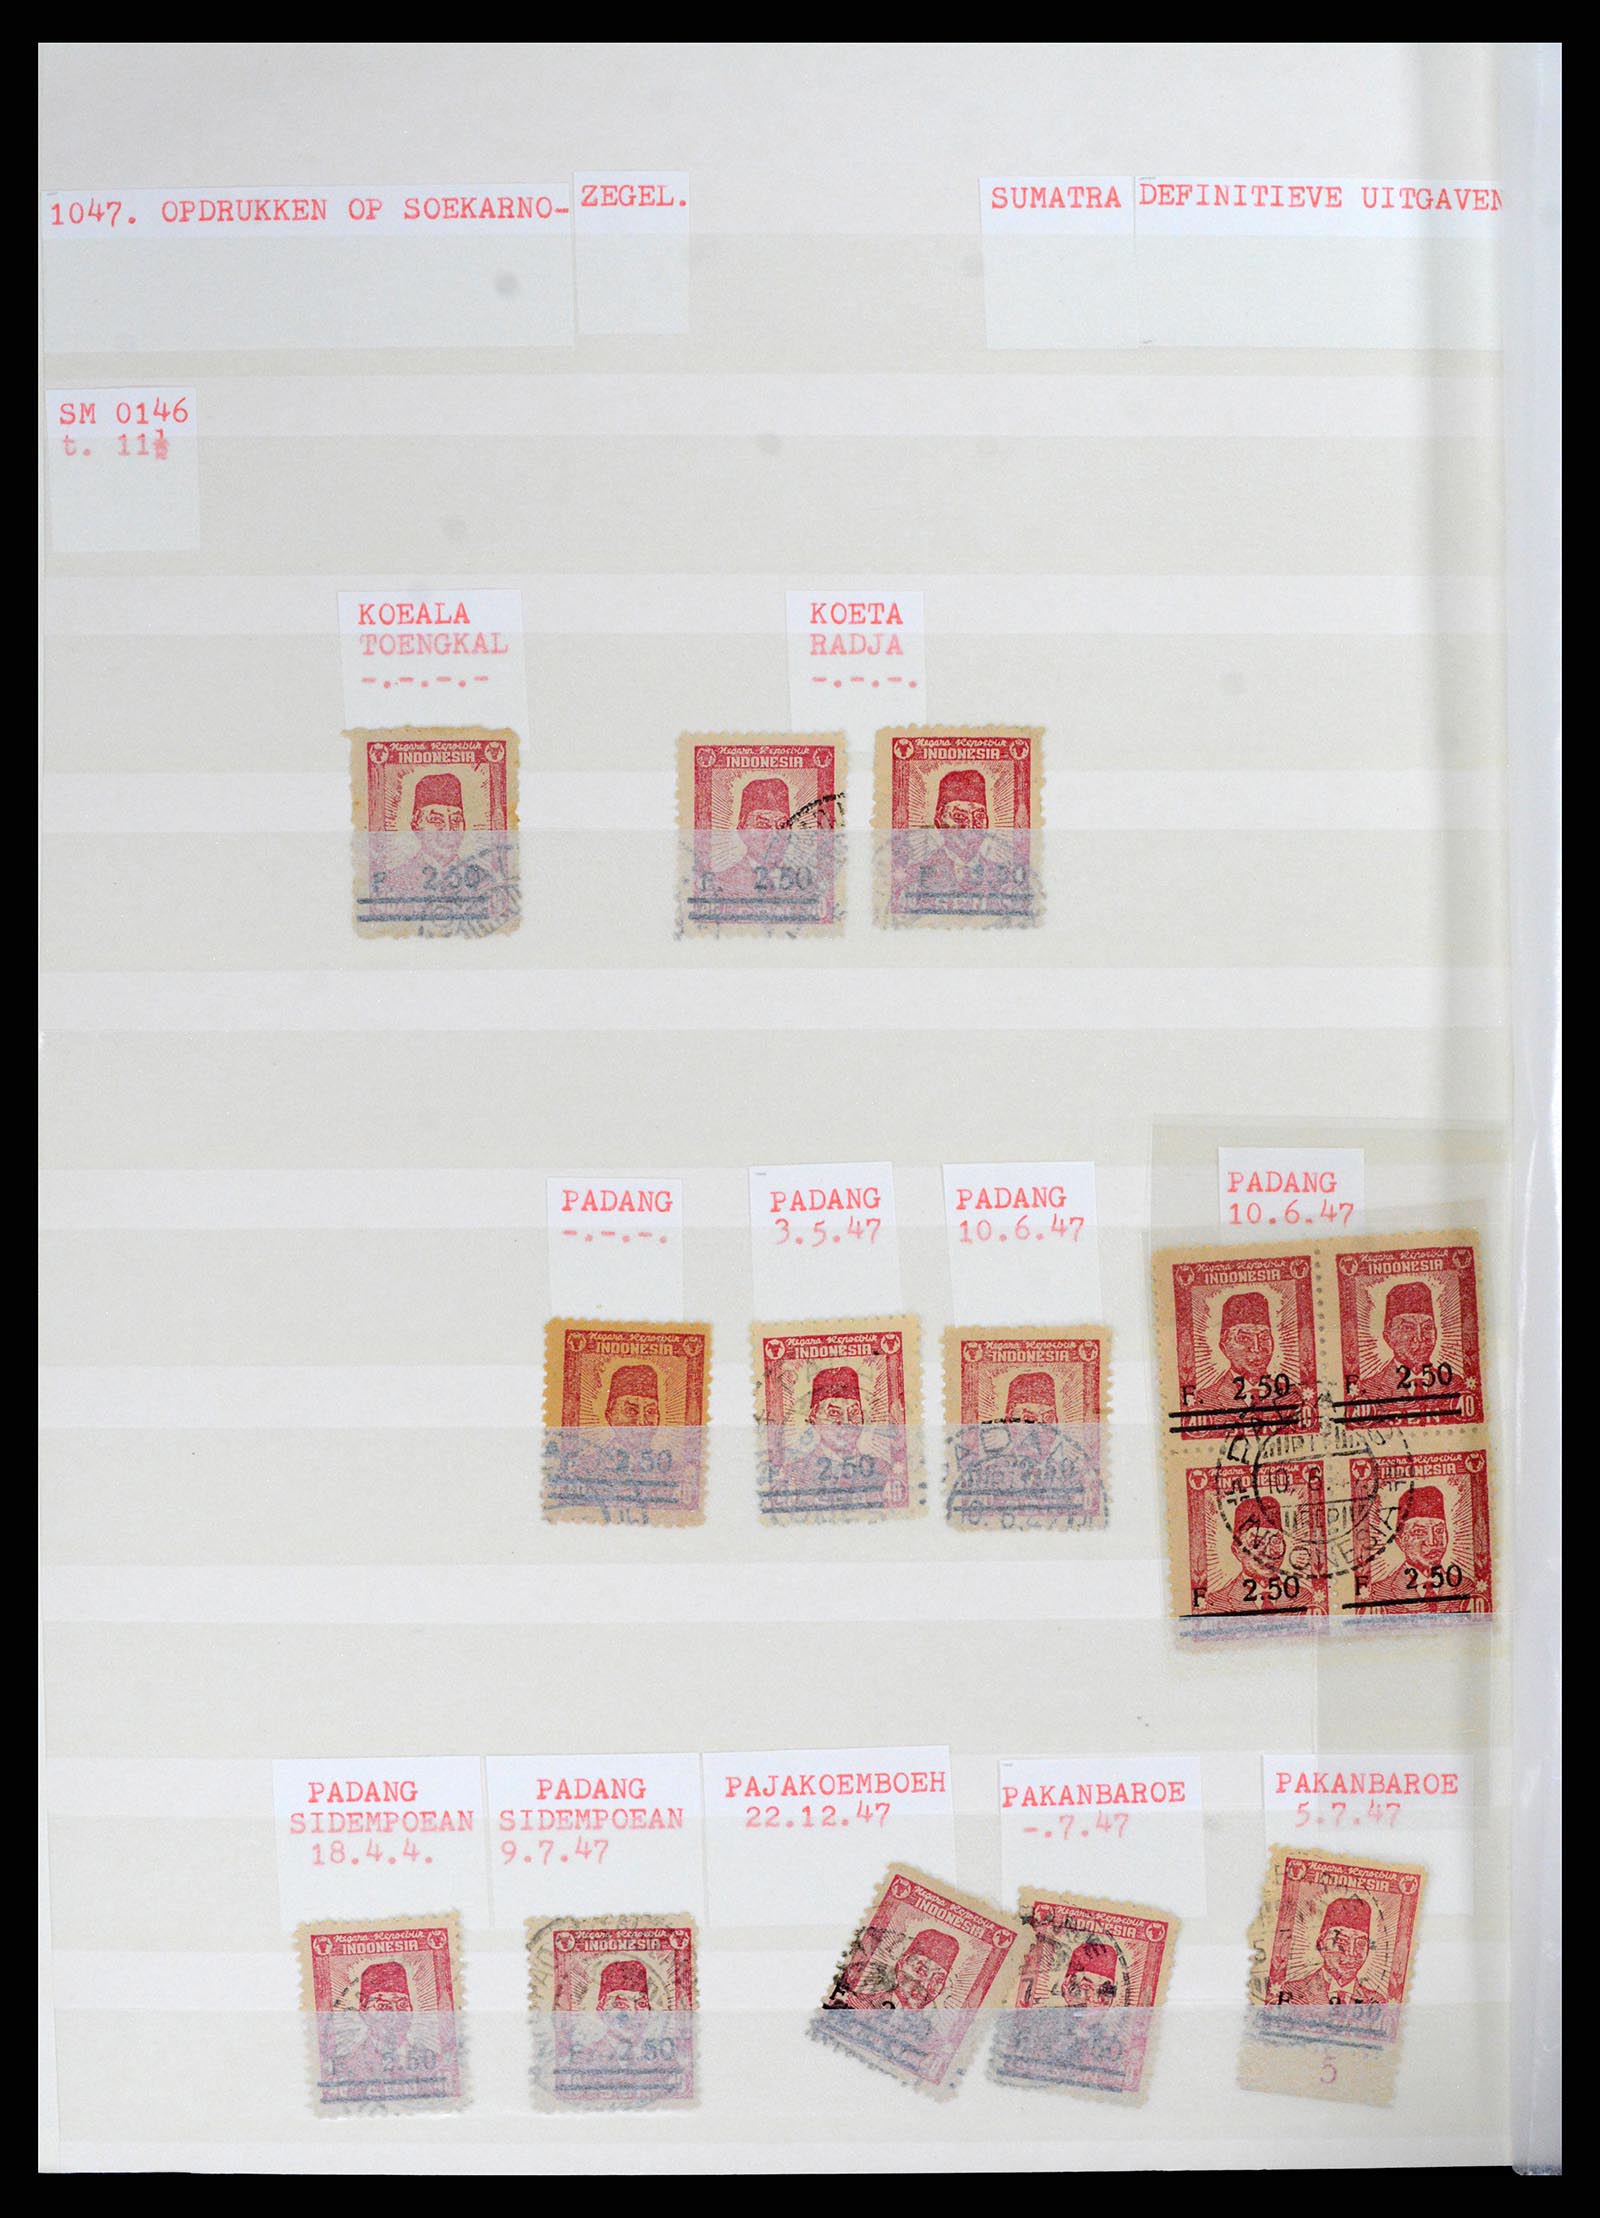 37692 127 - Stamp collection 37692 Indonesia interimperiod 1945-1499.